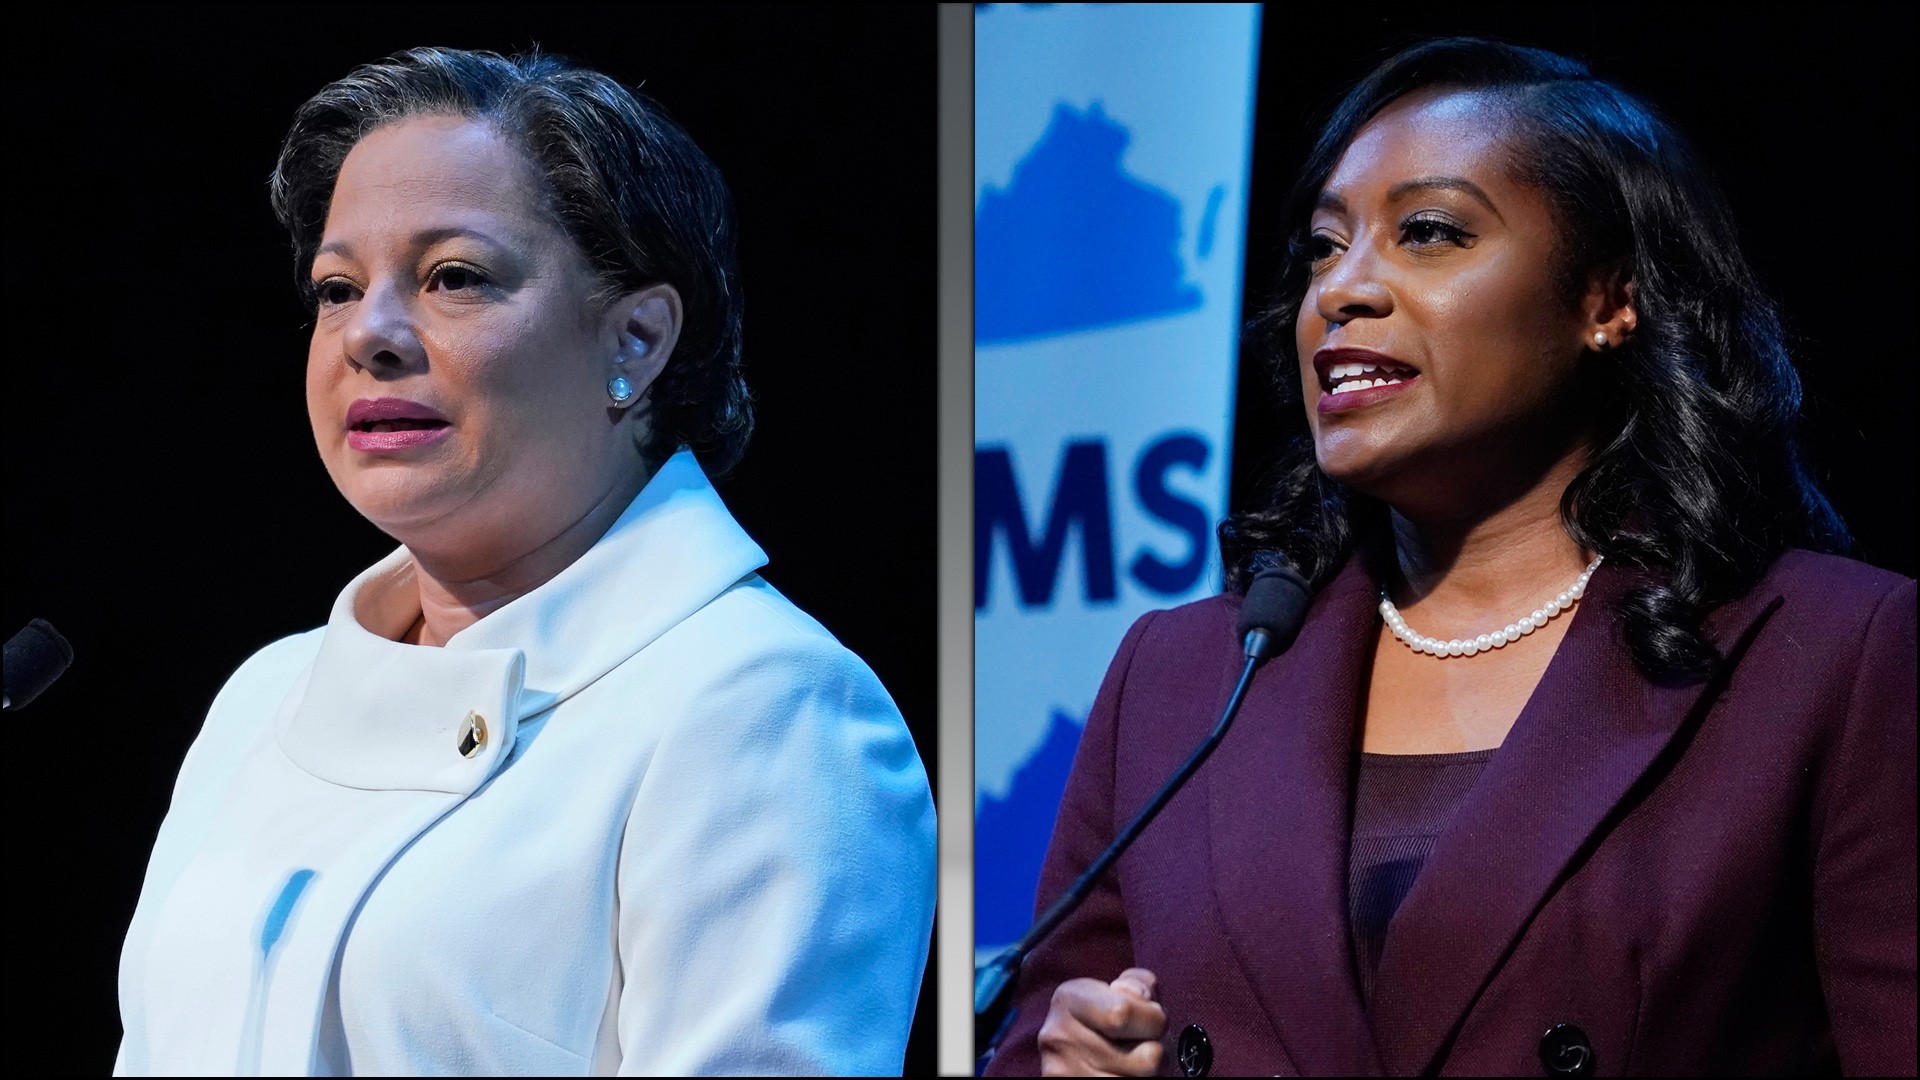 Jennifer McClellan and Jennifer Carroll Foy hope to make history's as this country's first African-American female governor.